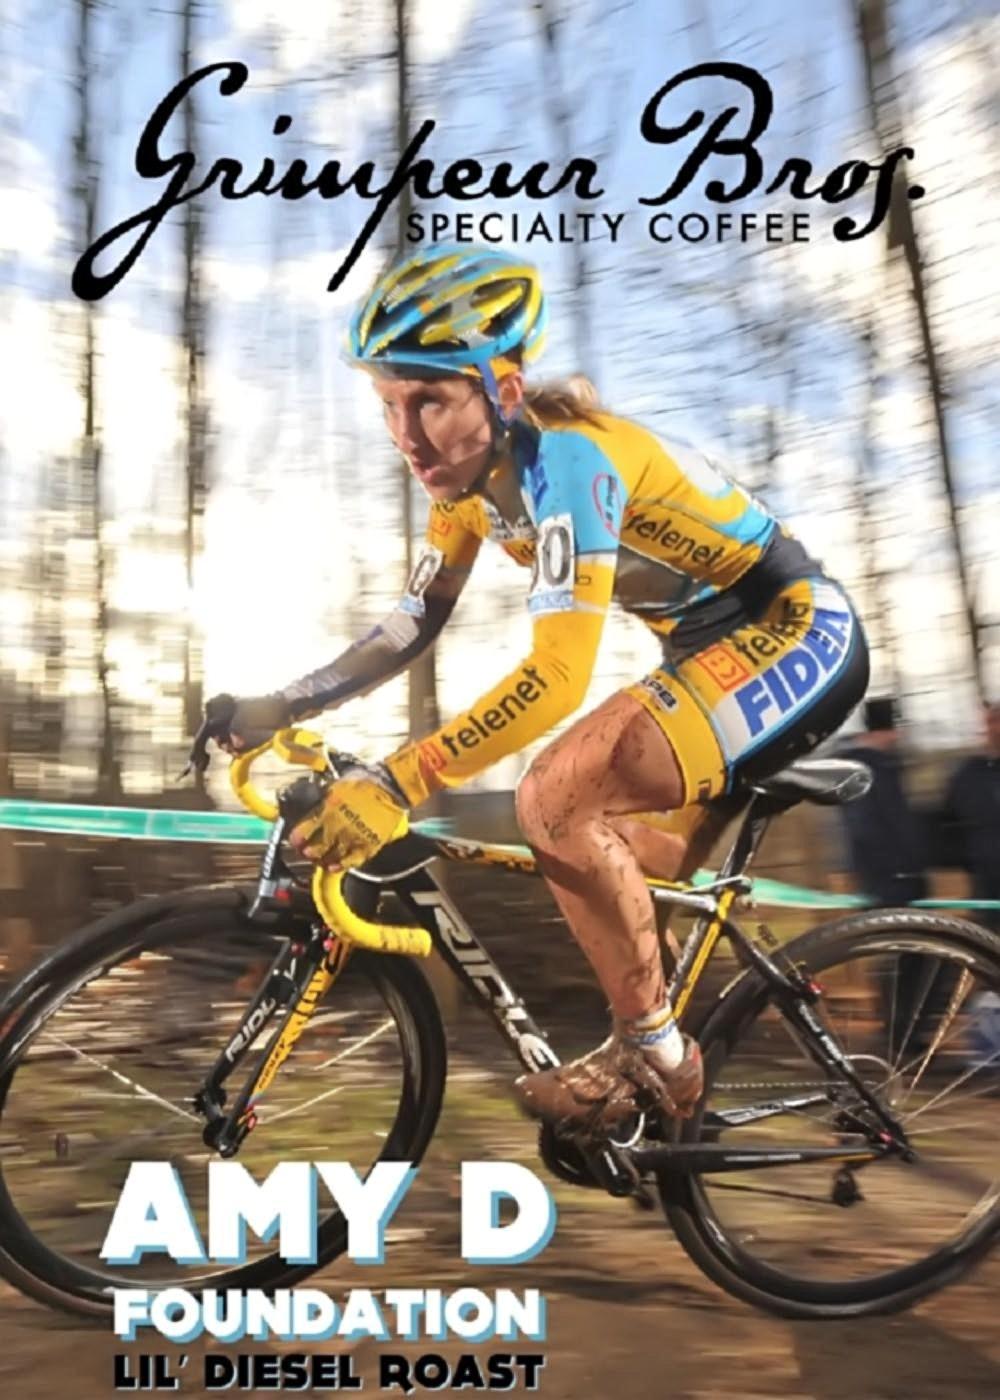 Ride your bike - drink great coffee!